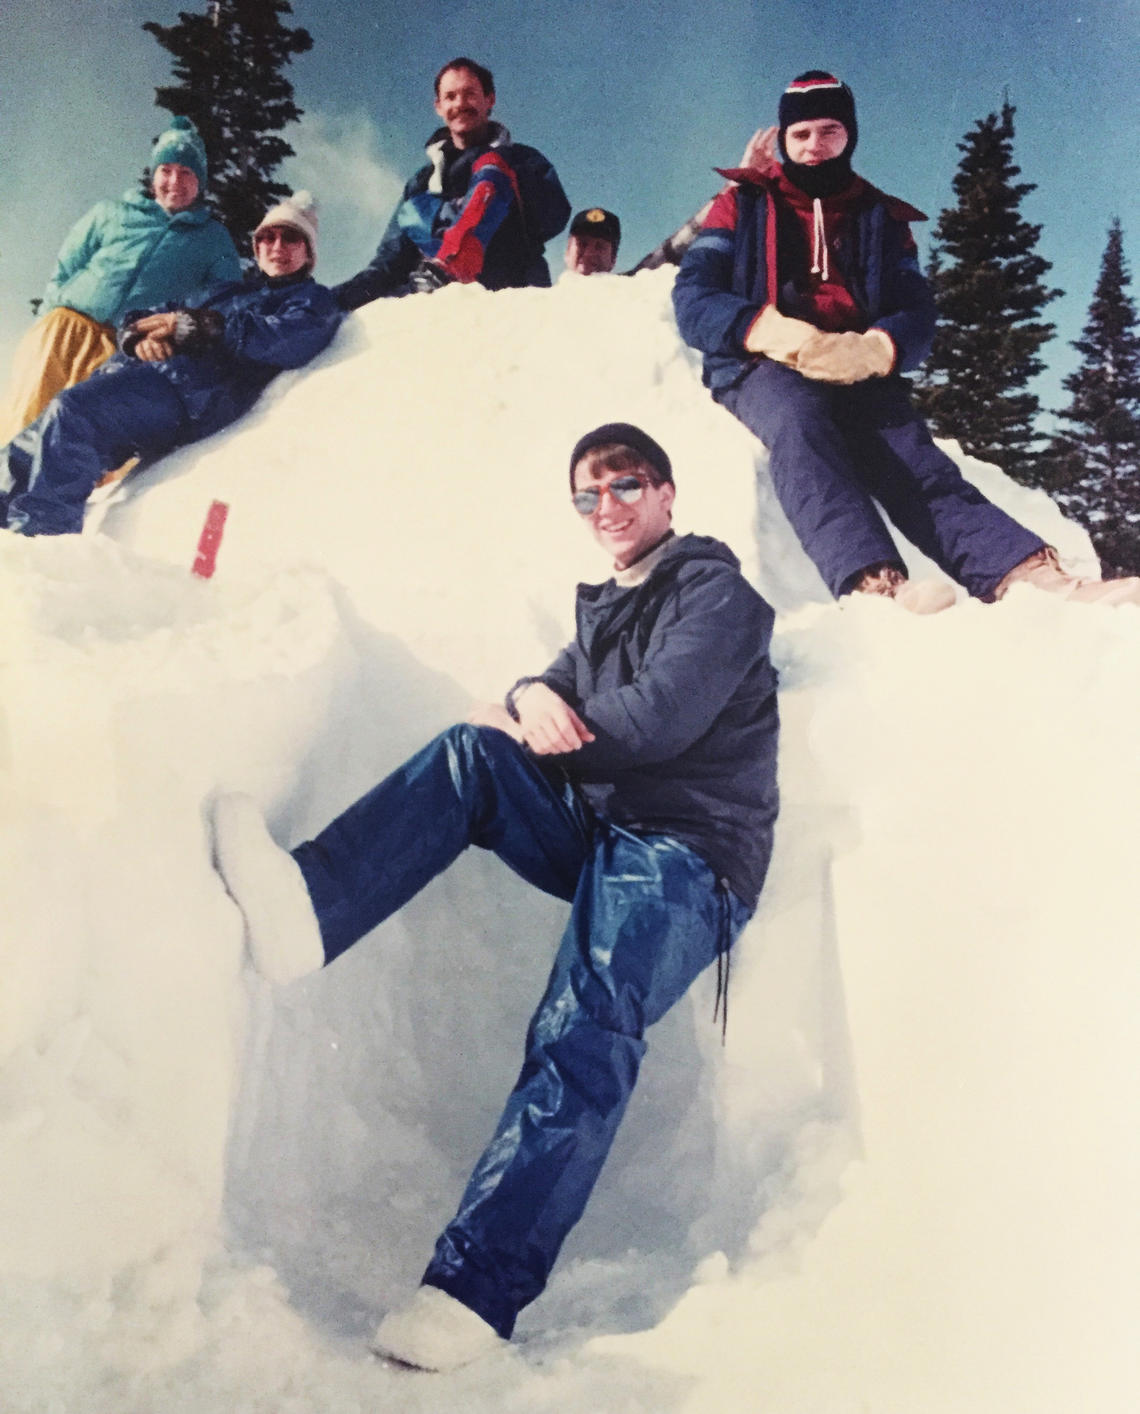 Founding member of the University of Calgary Outdoor Centre Alf Skrastins, top, with other outdoor enthusiasts in a snow shelter. 